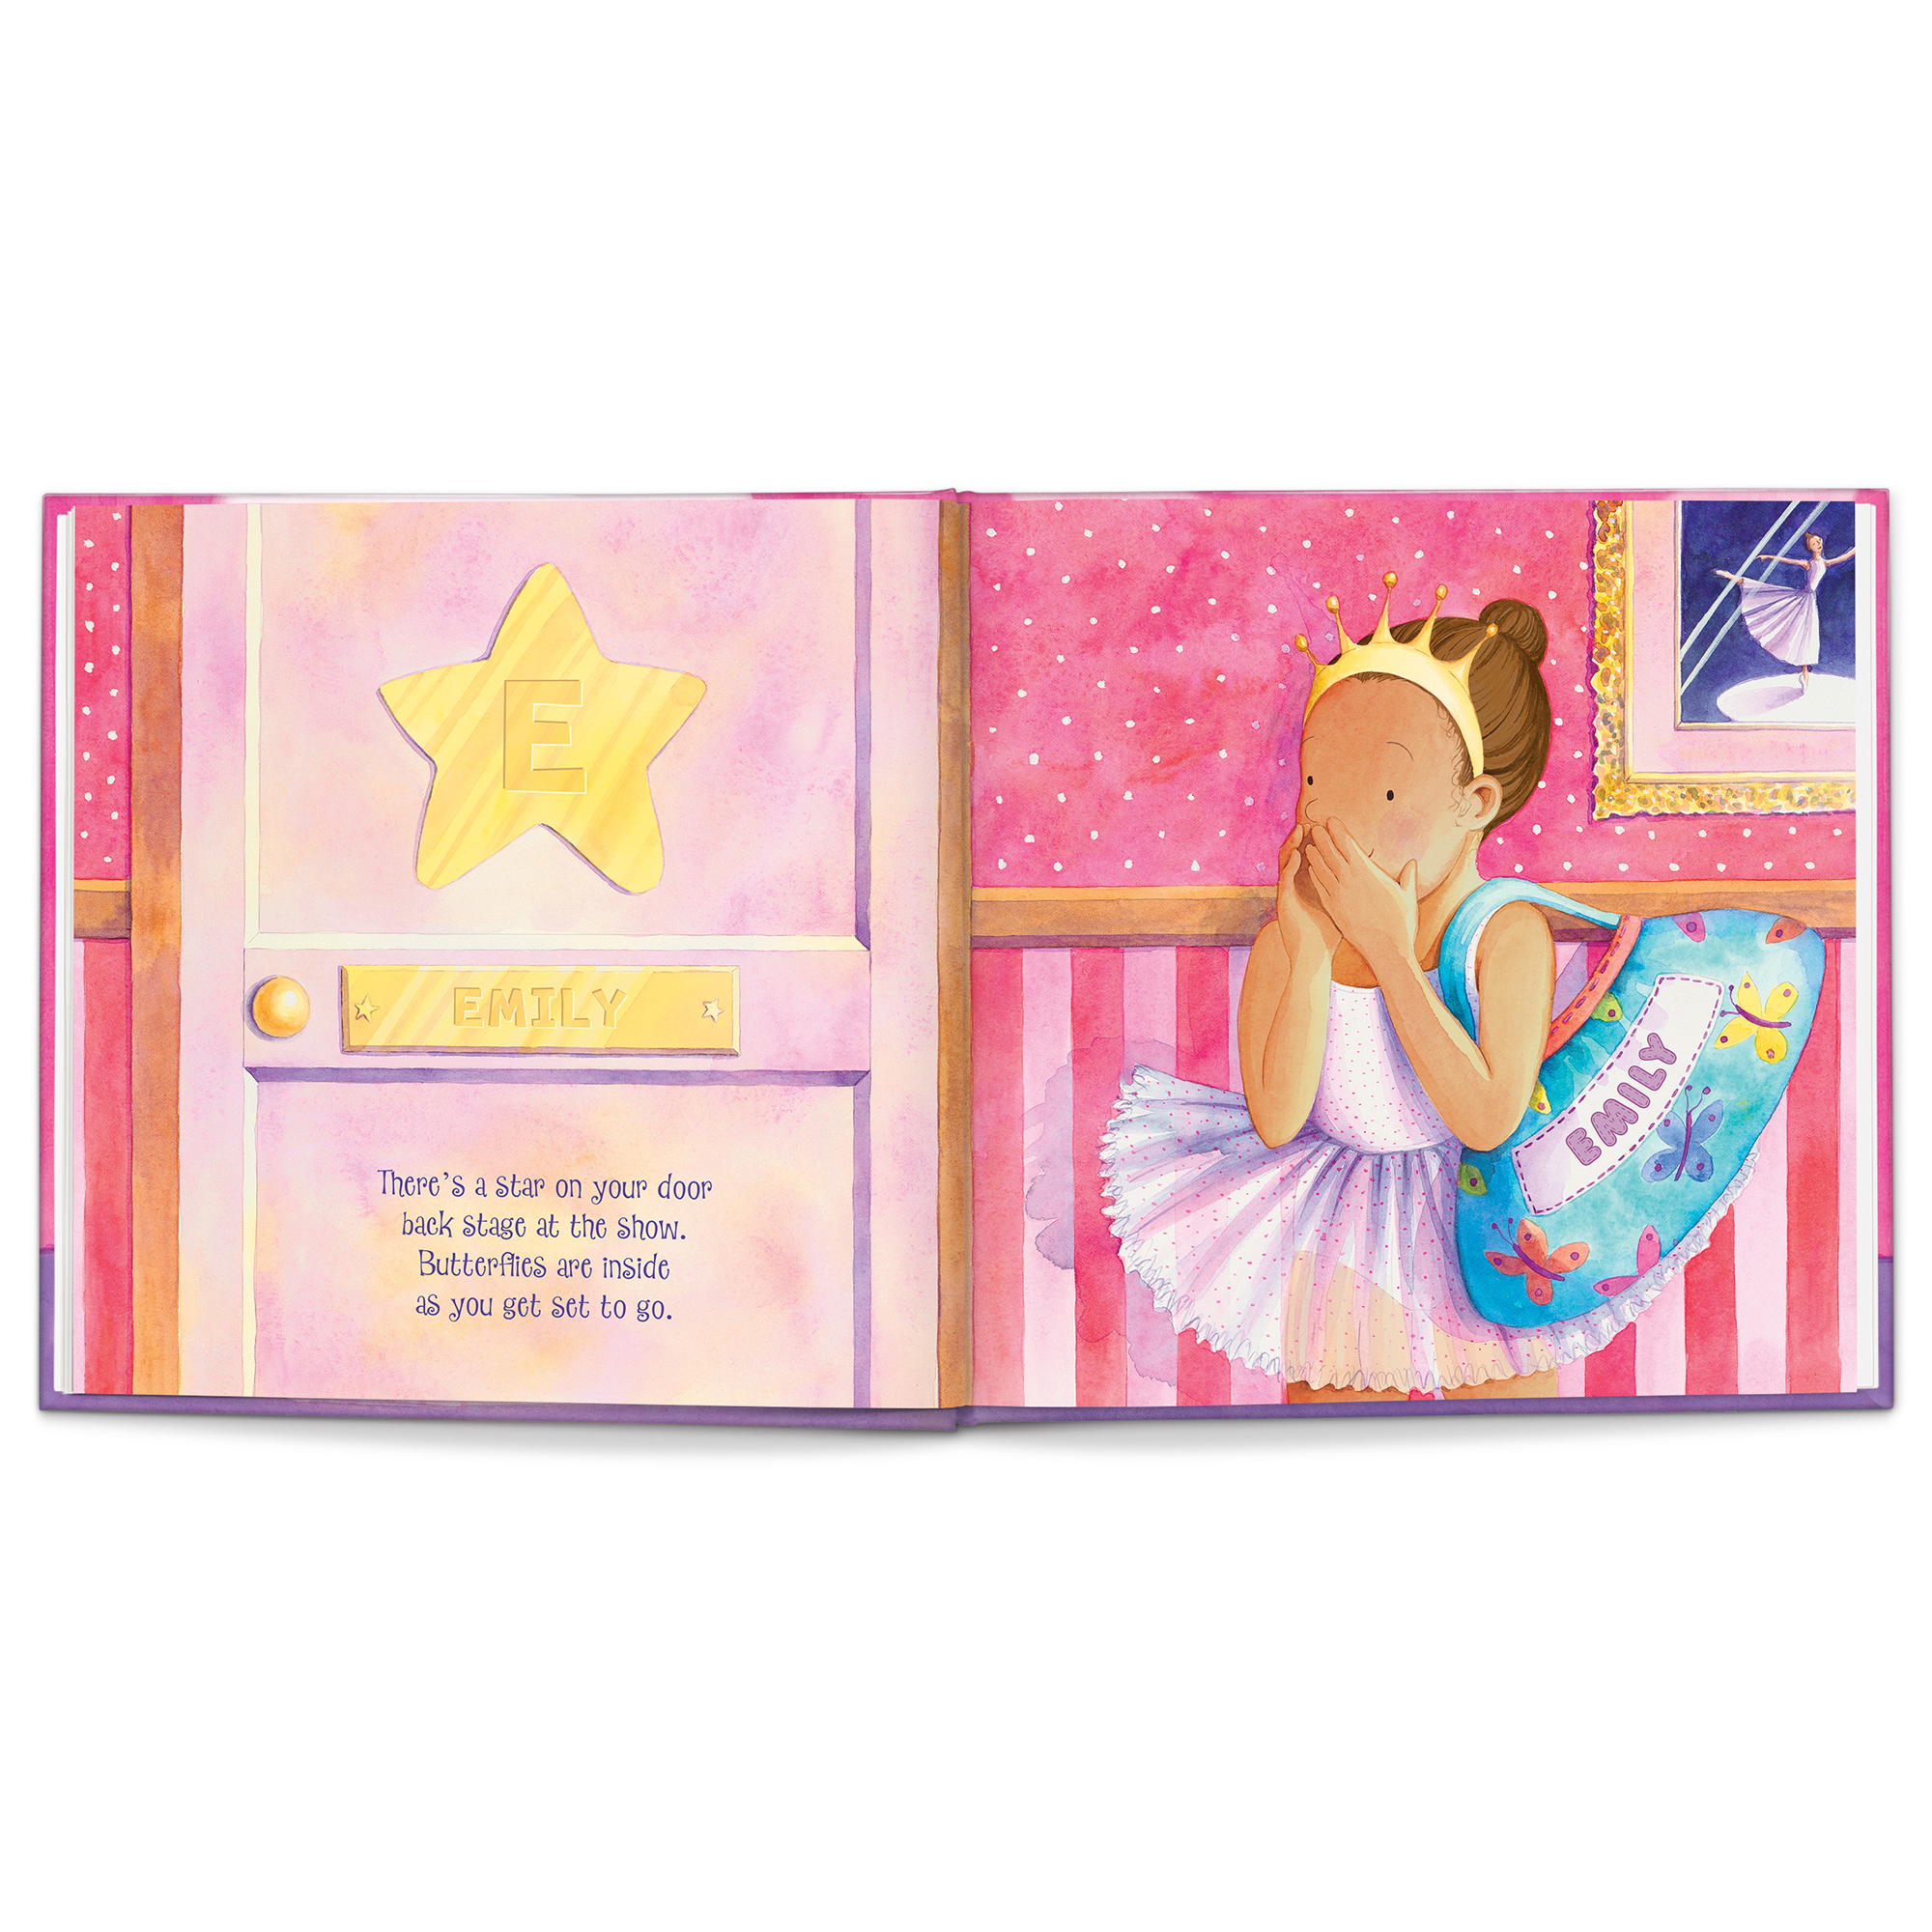 I’m a Little Dancer Personalised Storybook